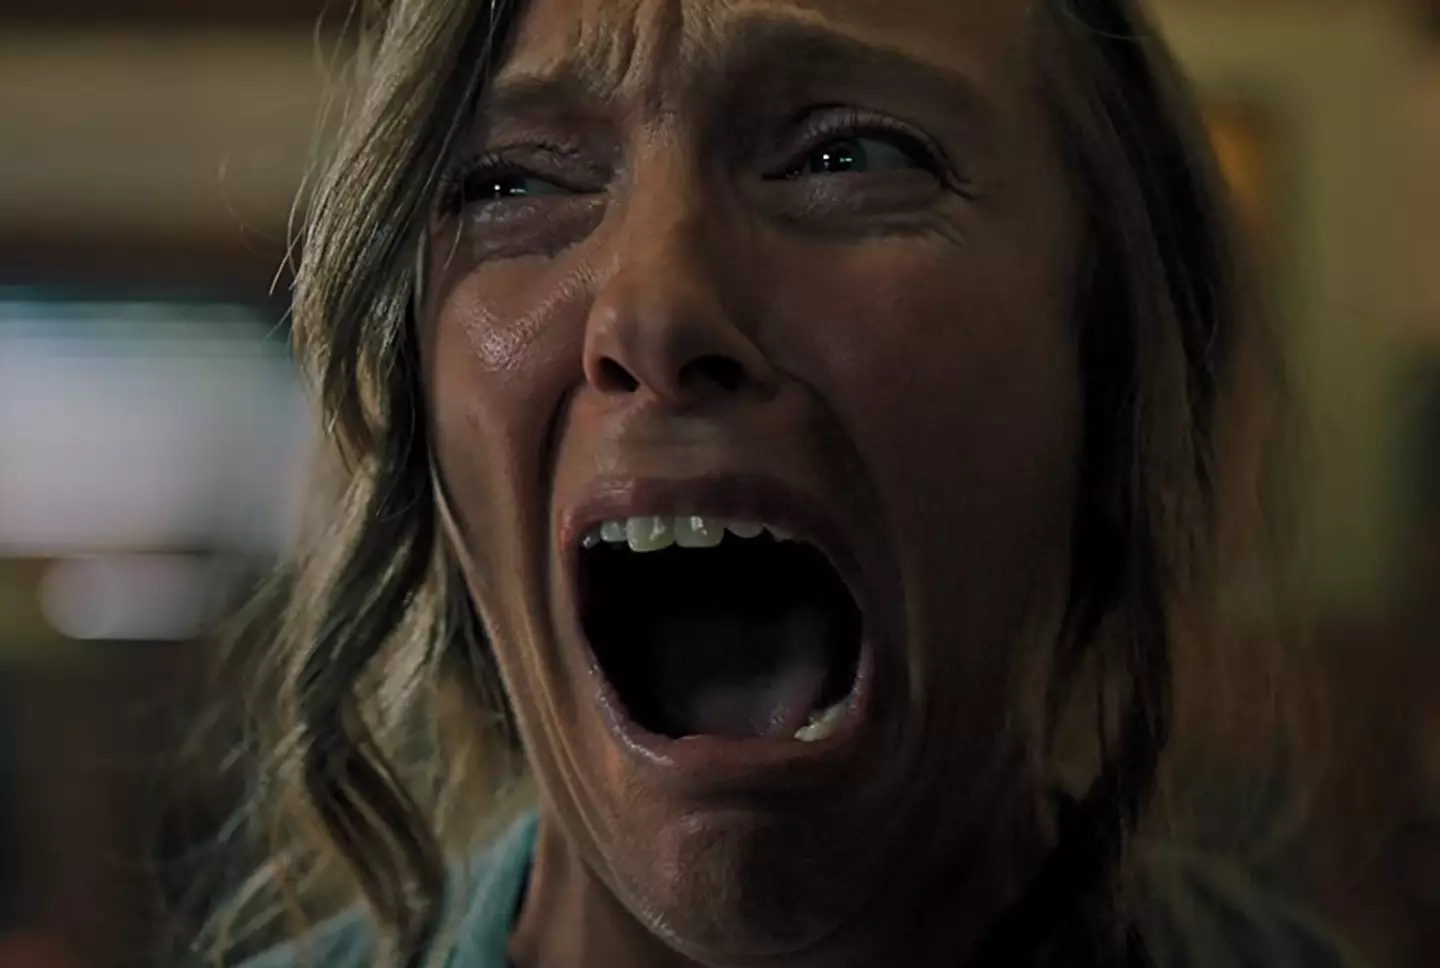 Collette was not recognised at the Oscars for her performance in Hereditary.